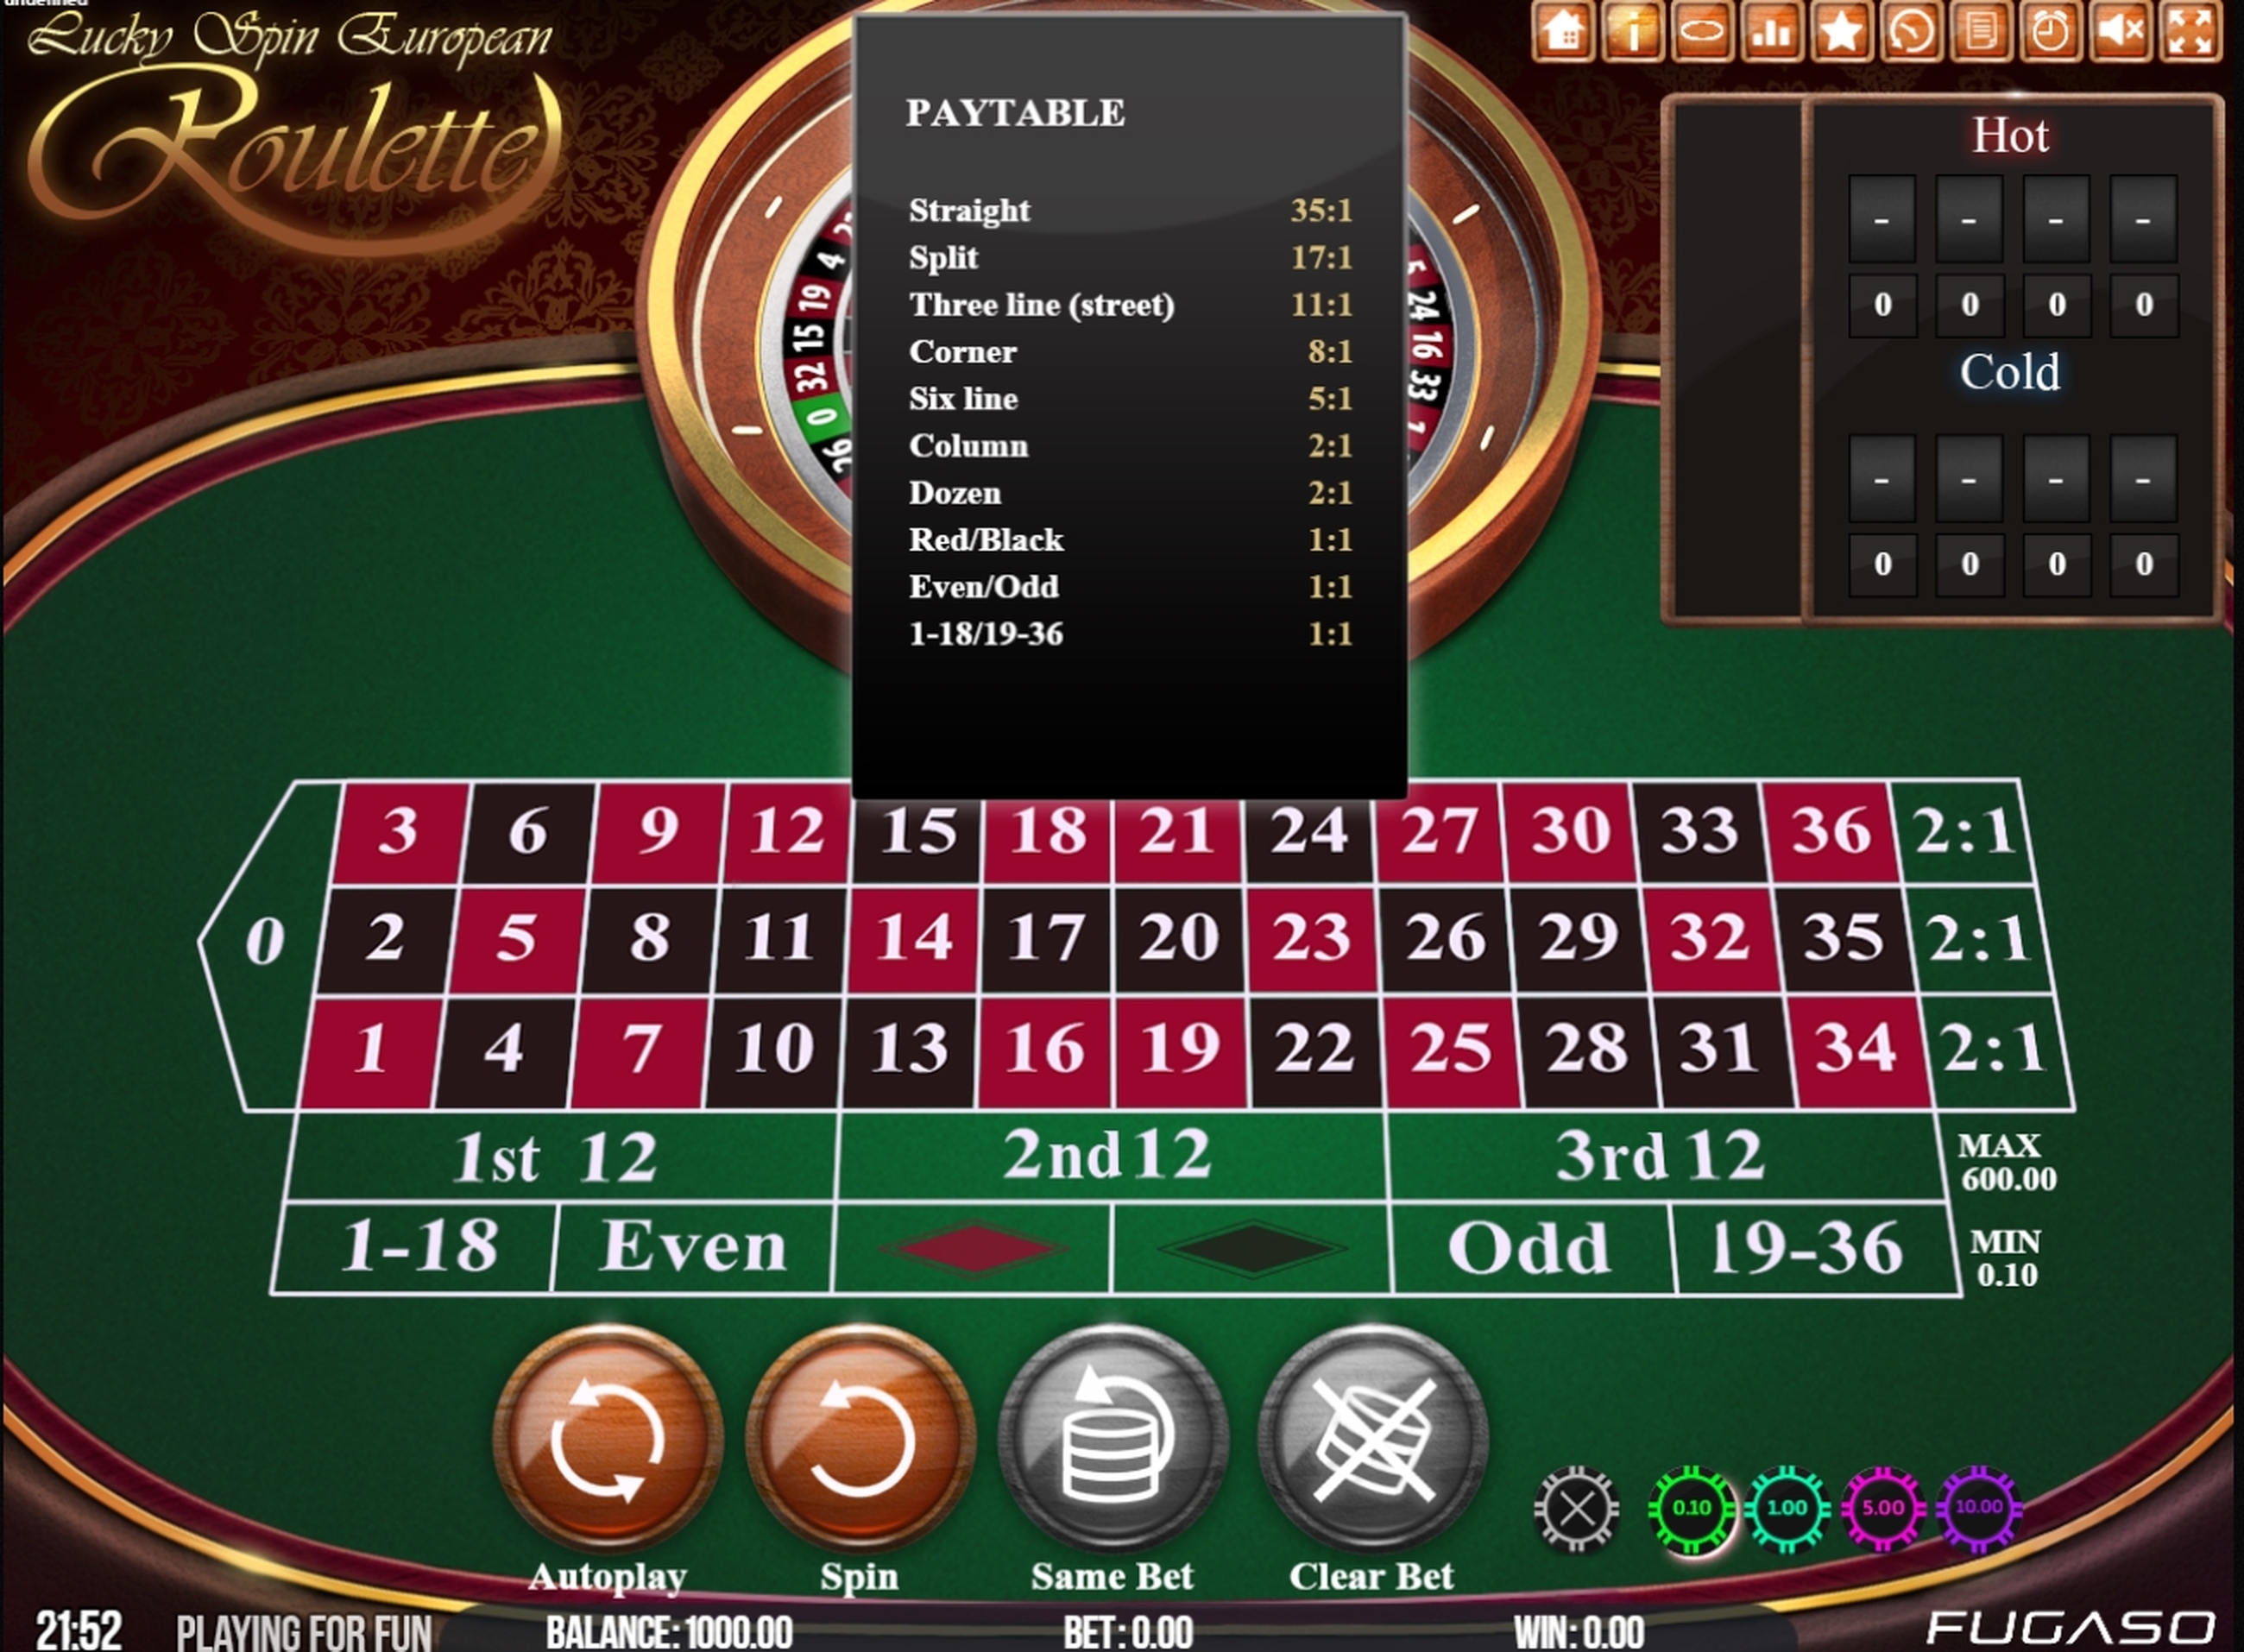 Info of Lucky Spin European Roulette Slot Game by Fugaso